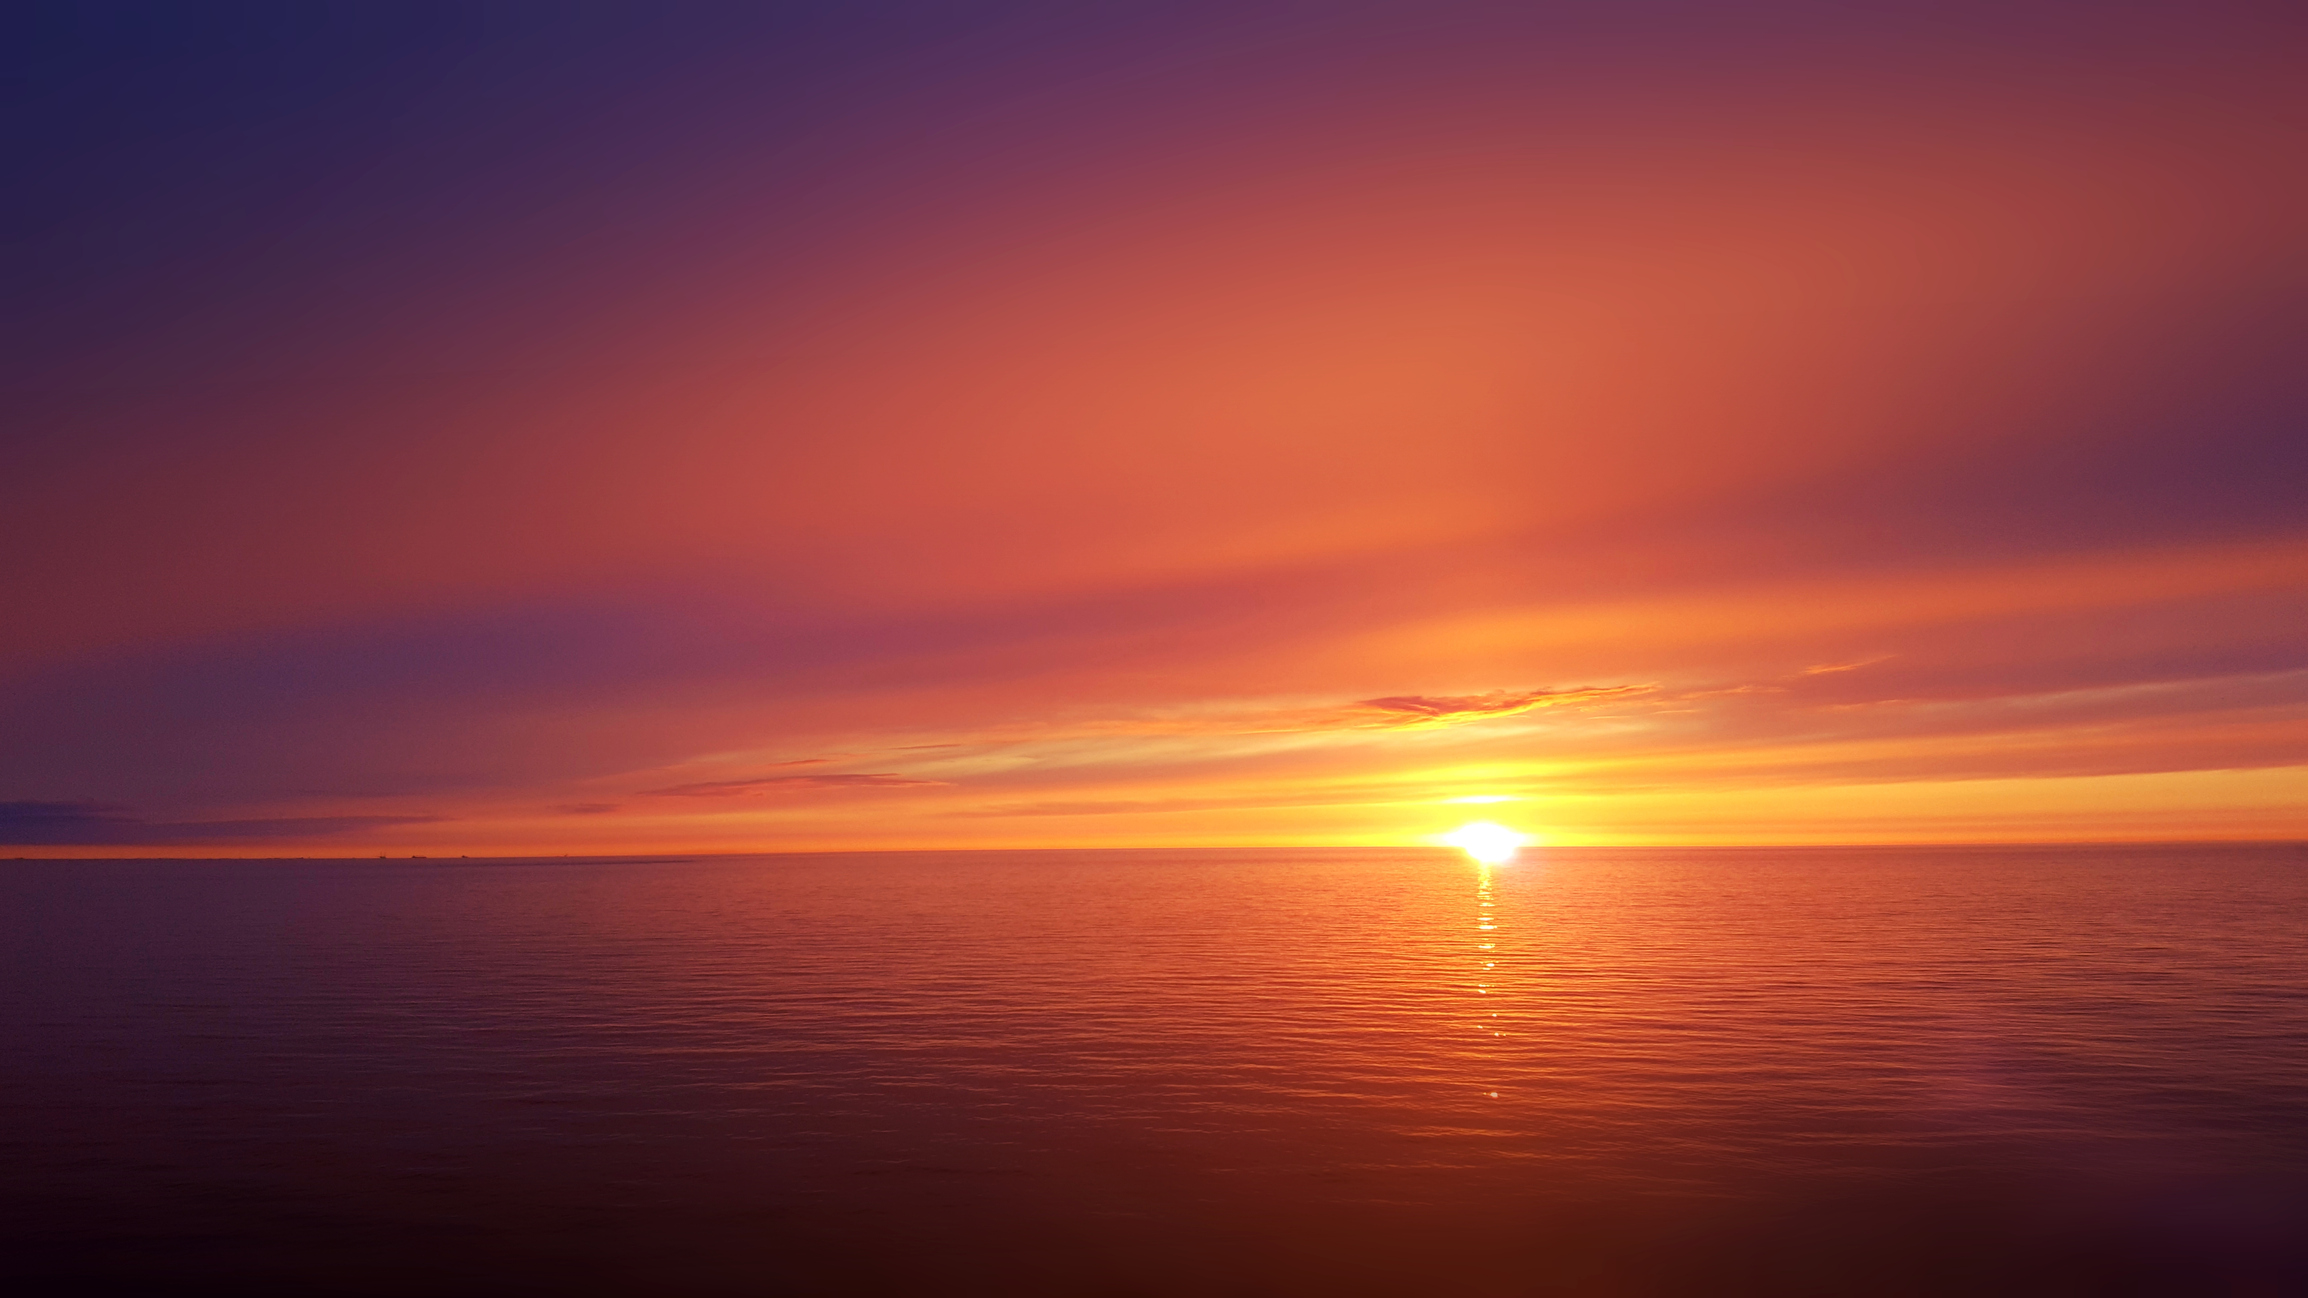 Photo of a sunset over the horizon on a body of water